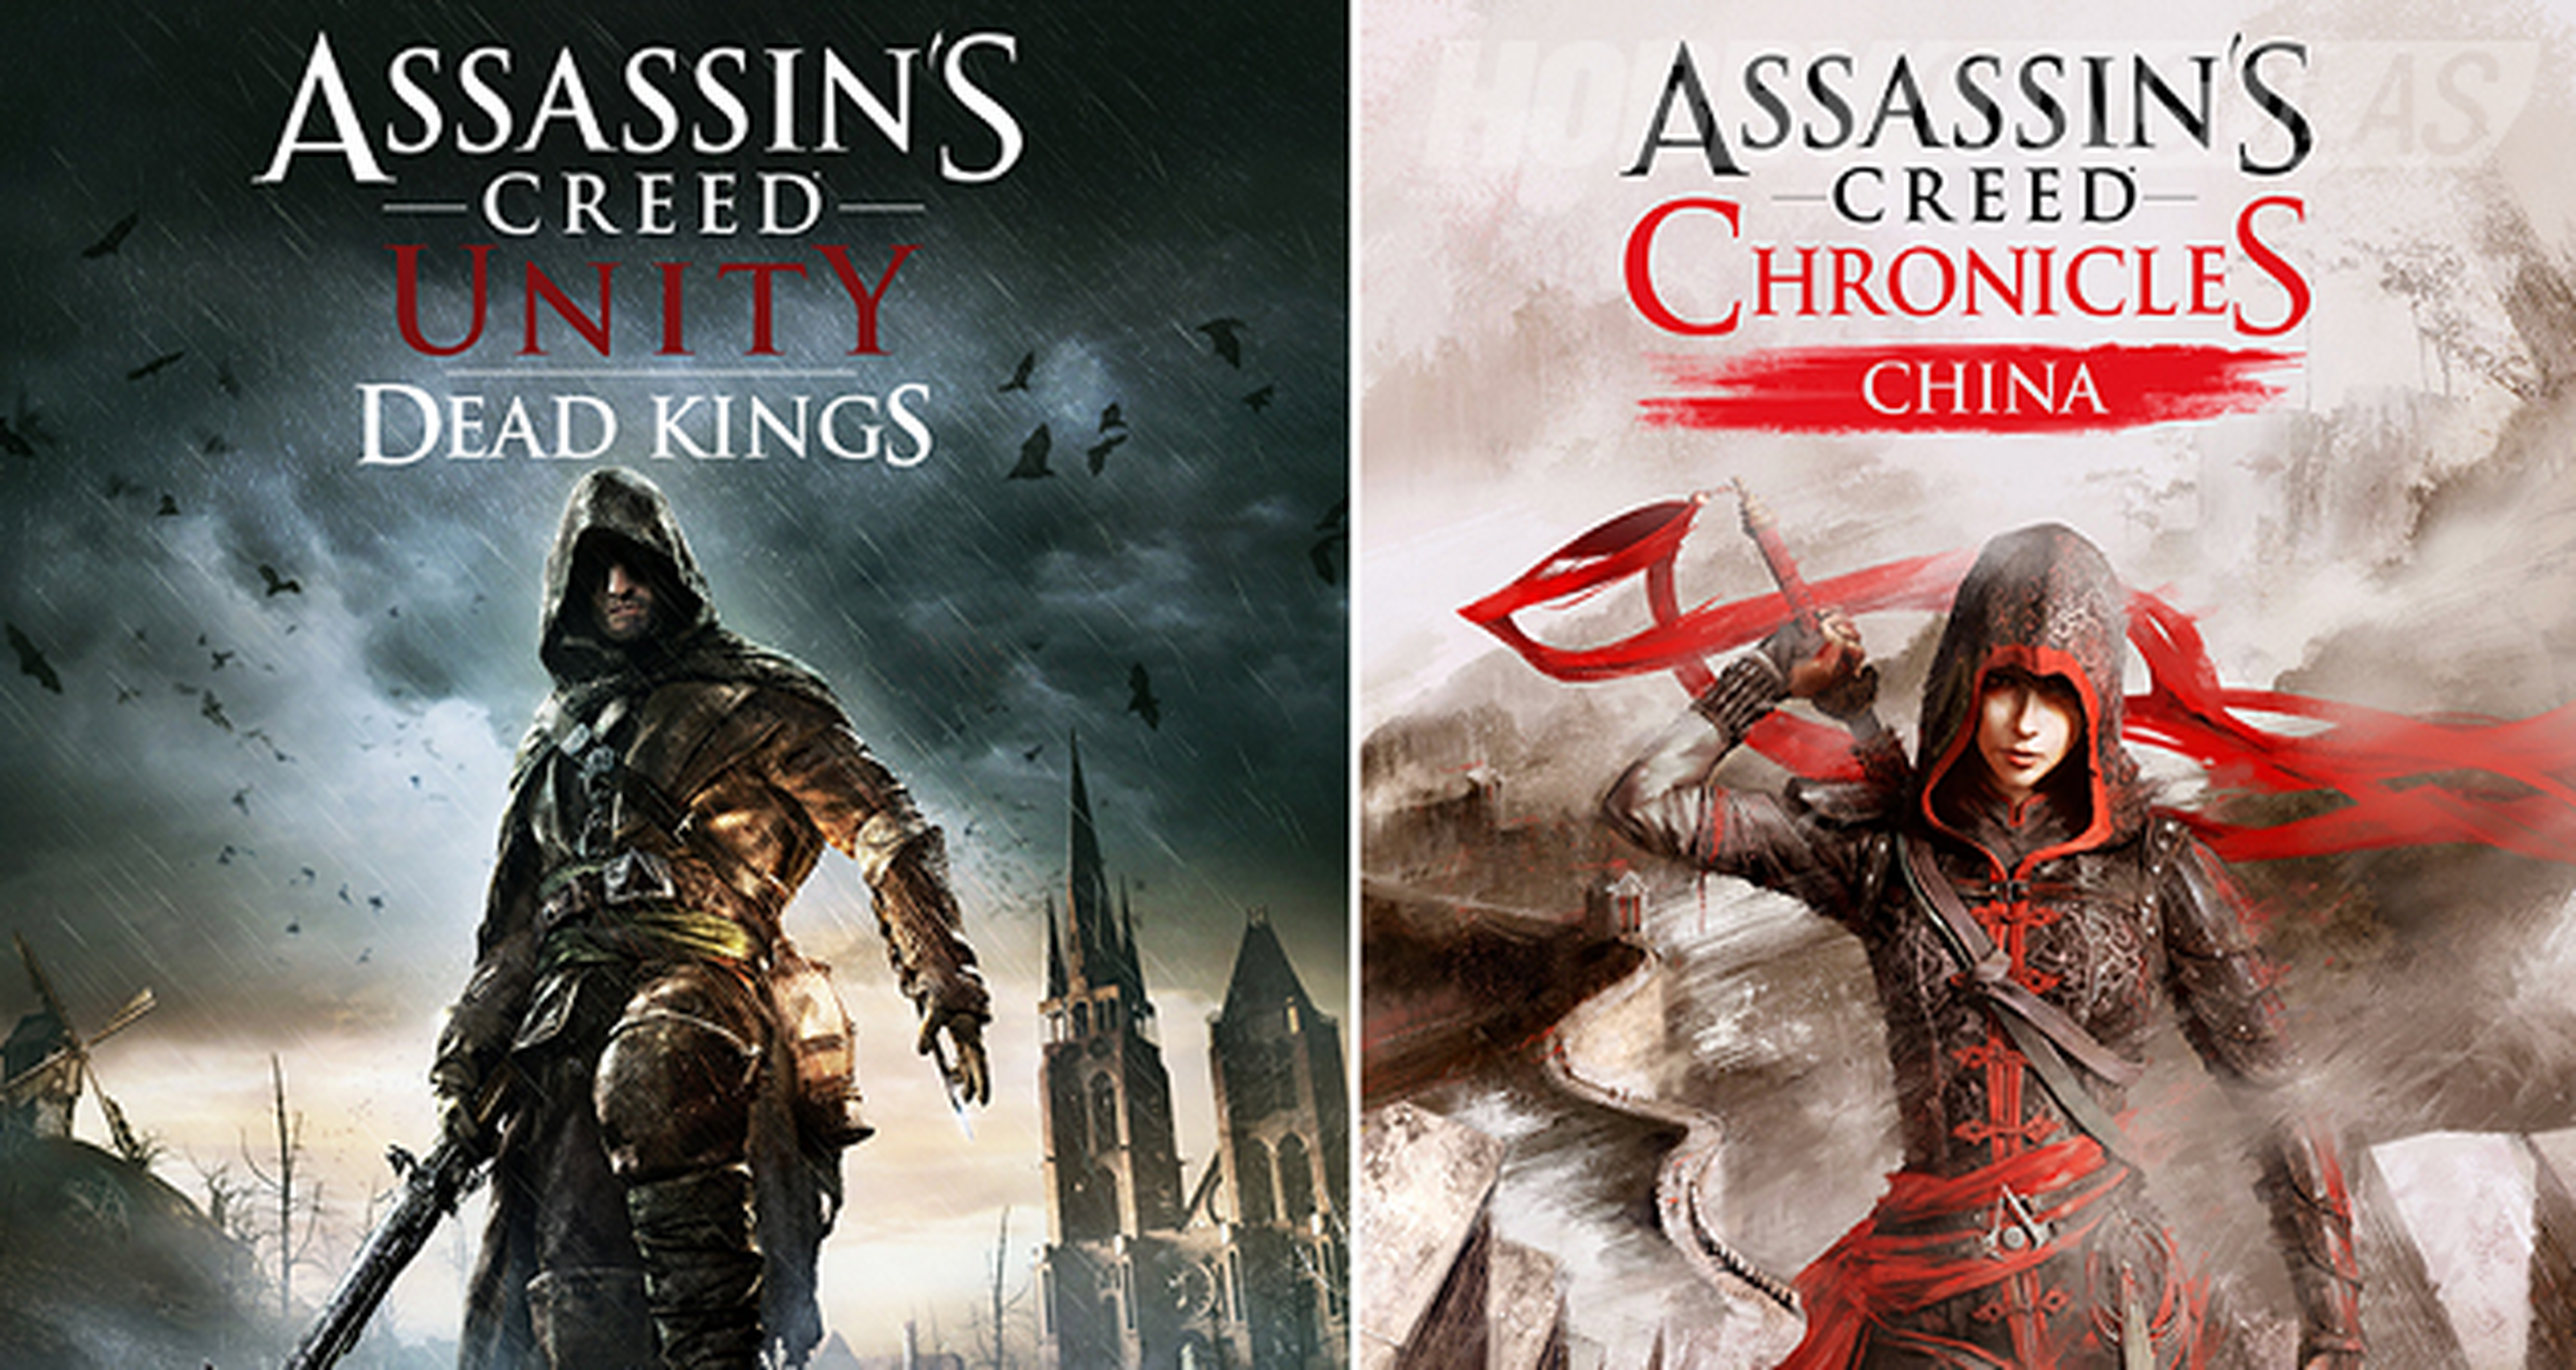 Imágenes de Assassin&#039;s Creed Unity Reyes Muertos y Assassin&#039;s Creed Chronicles China